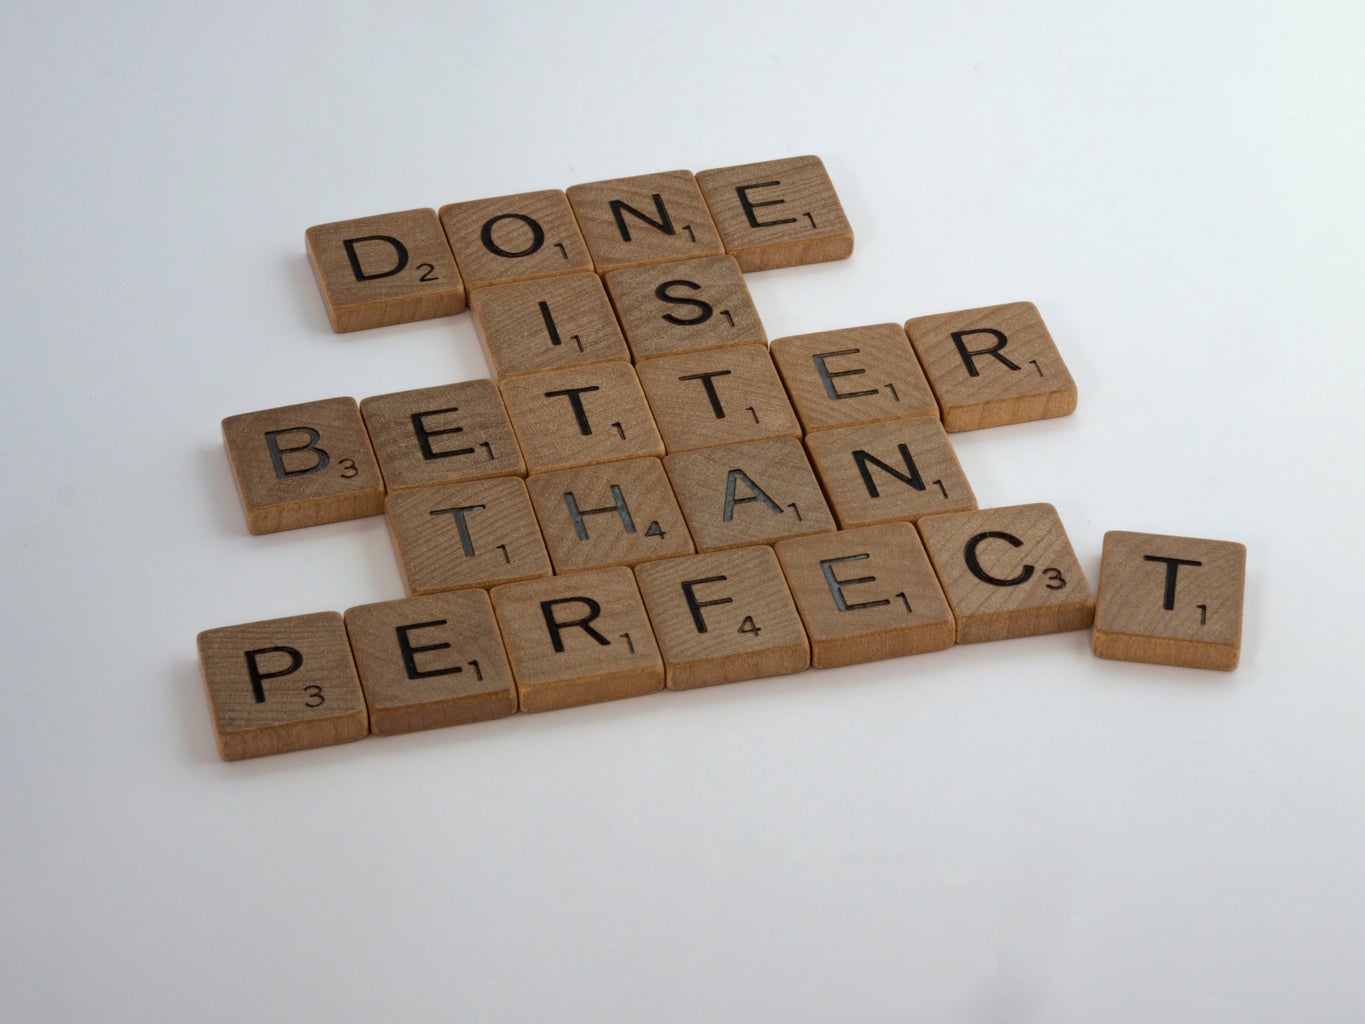 \'Done is better than perfect\' written in Scrabble letters.